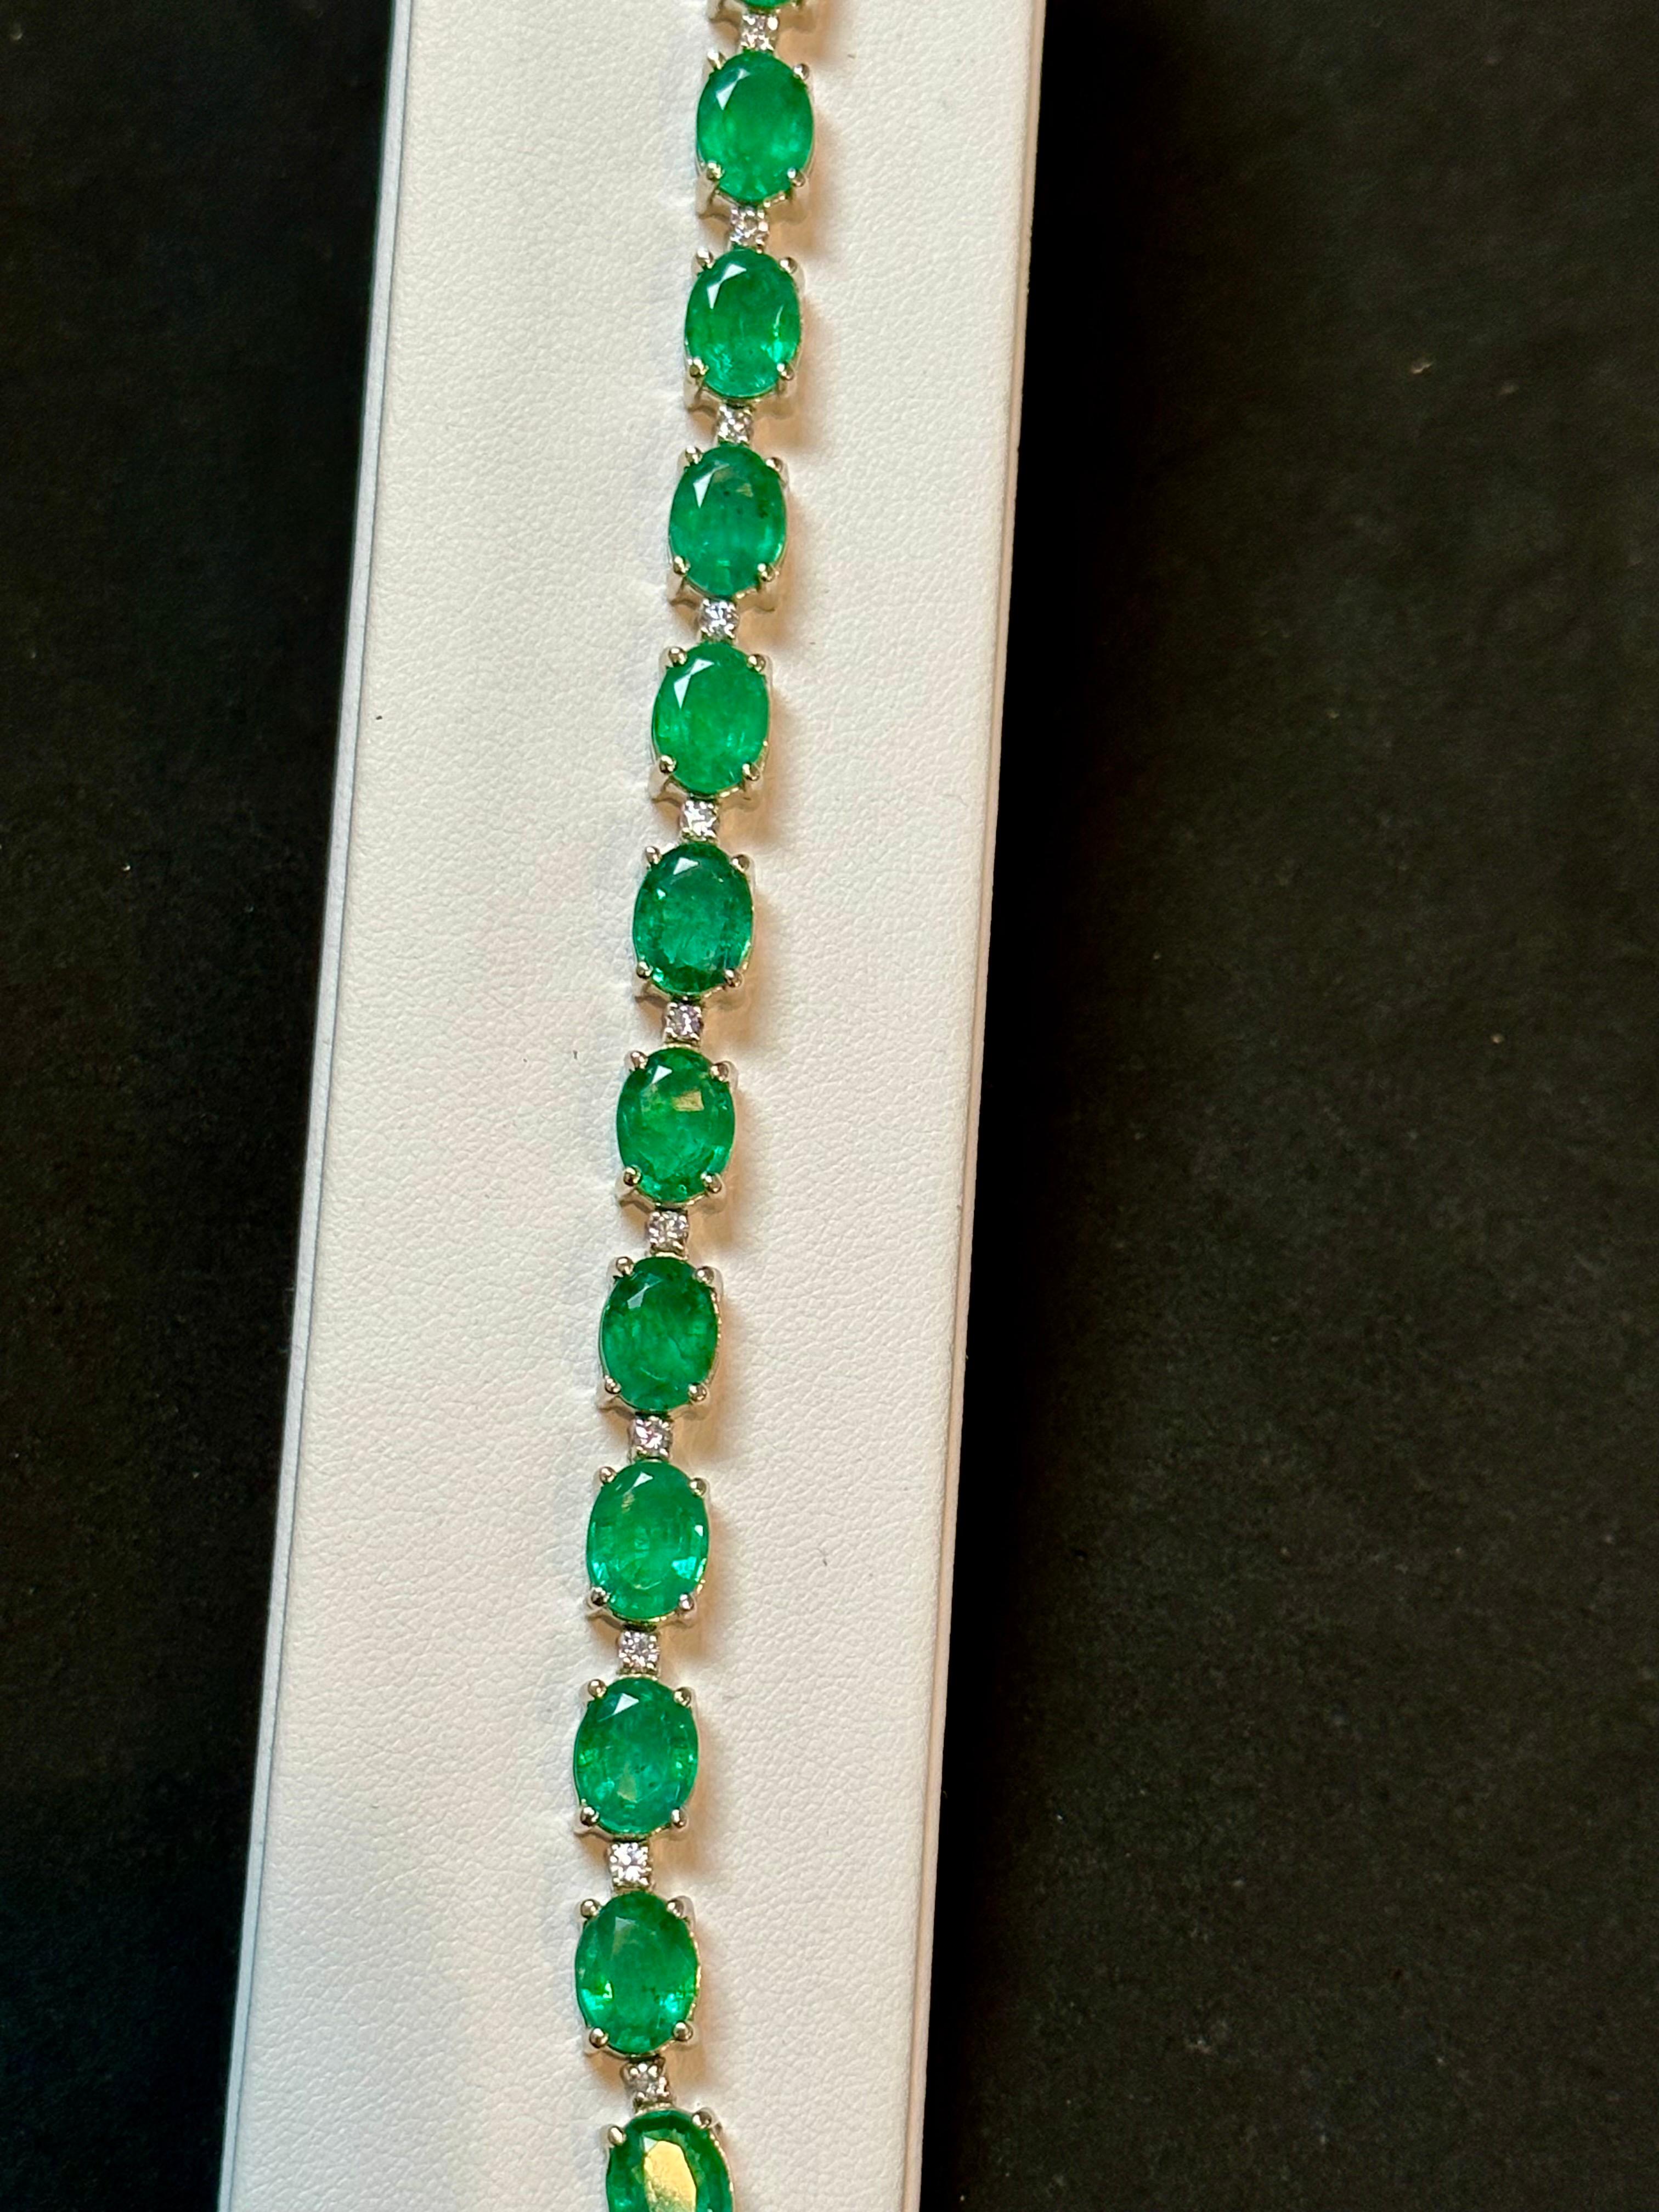 Introducing our remarkable 14 Karat Gold Tennis Bracelet adorned with approximately 30 carats of natural Zambian Emeralds and dazzling diamonds. This high-quality bracelet features 15 oval emeralds, carefully separated by brilliant-cut diamonds. The